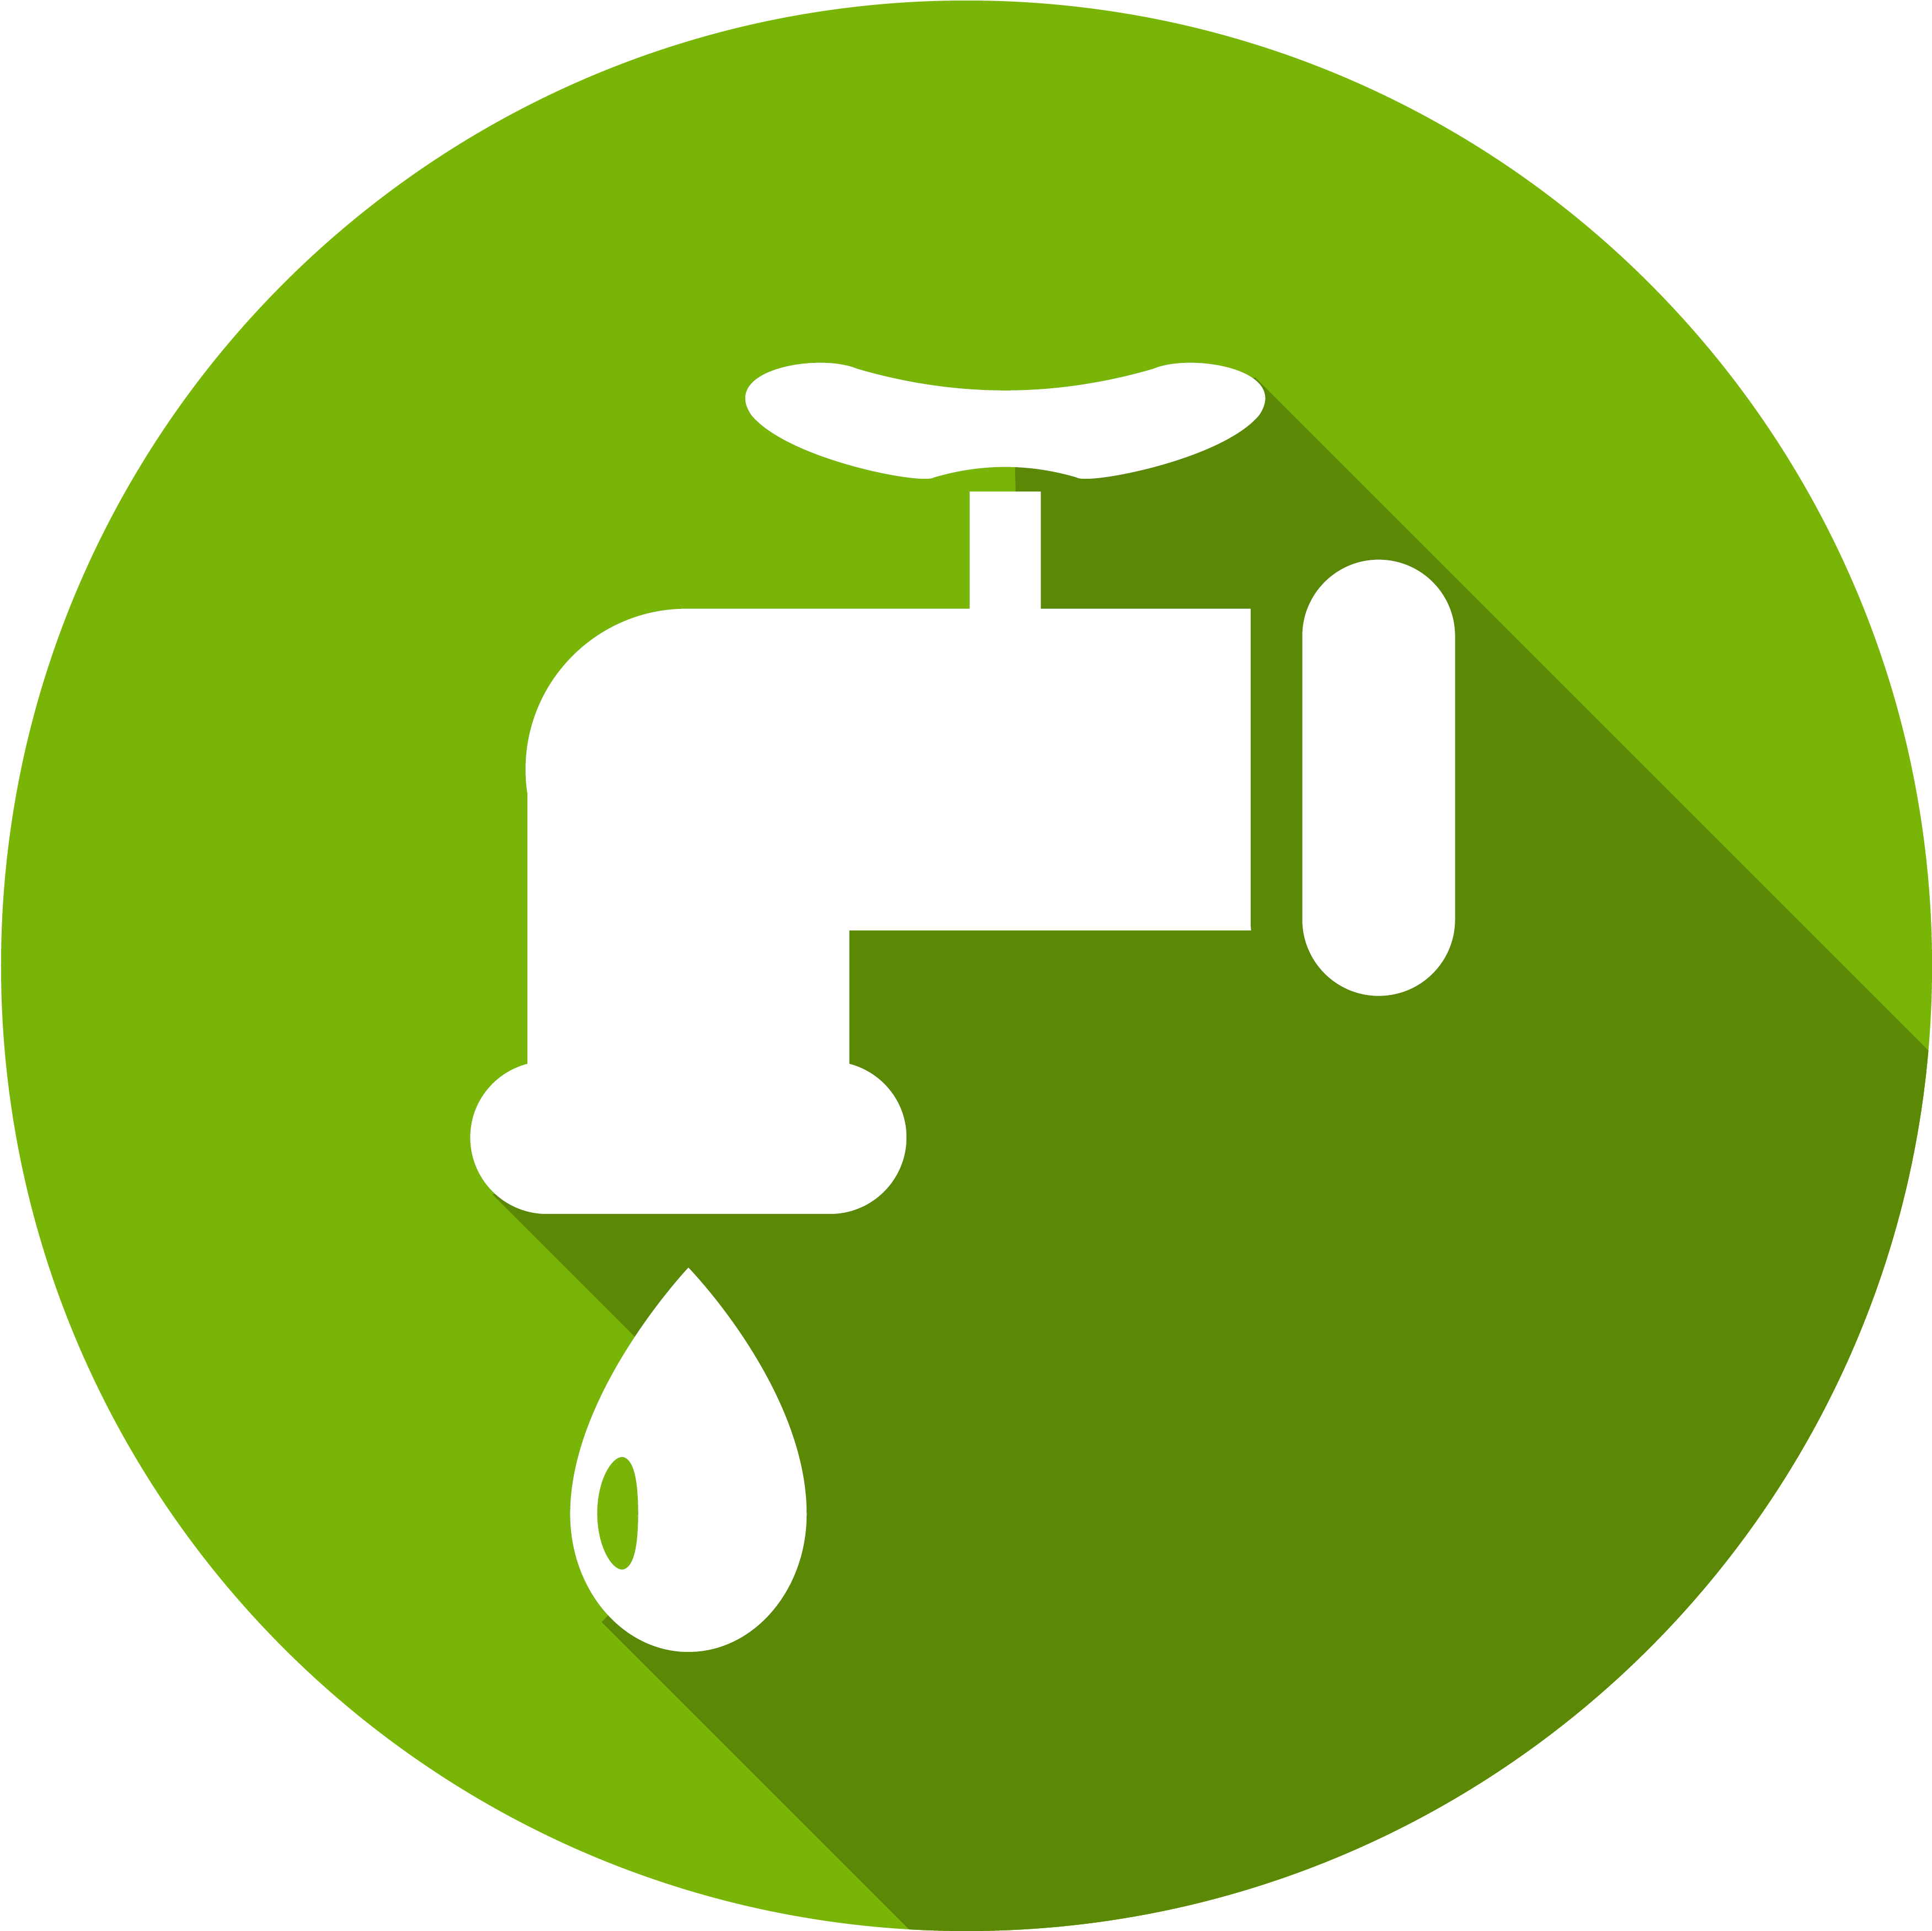 Bills clipart utility bill. Water drop electricity png